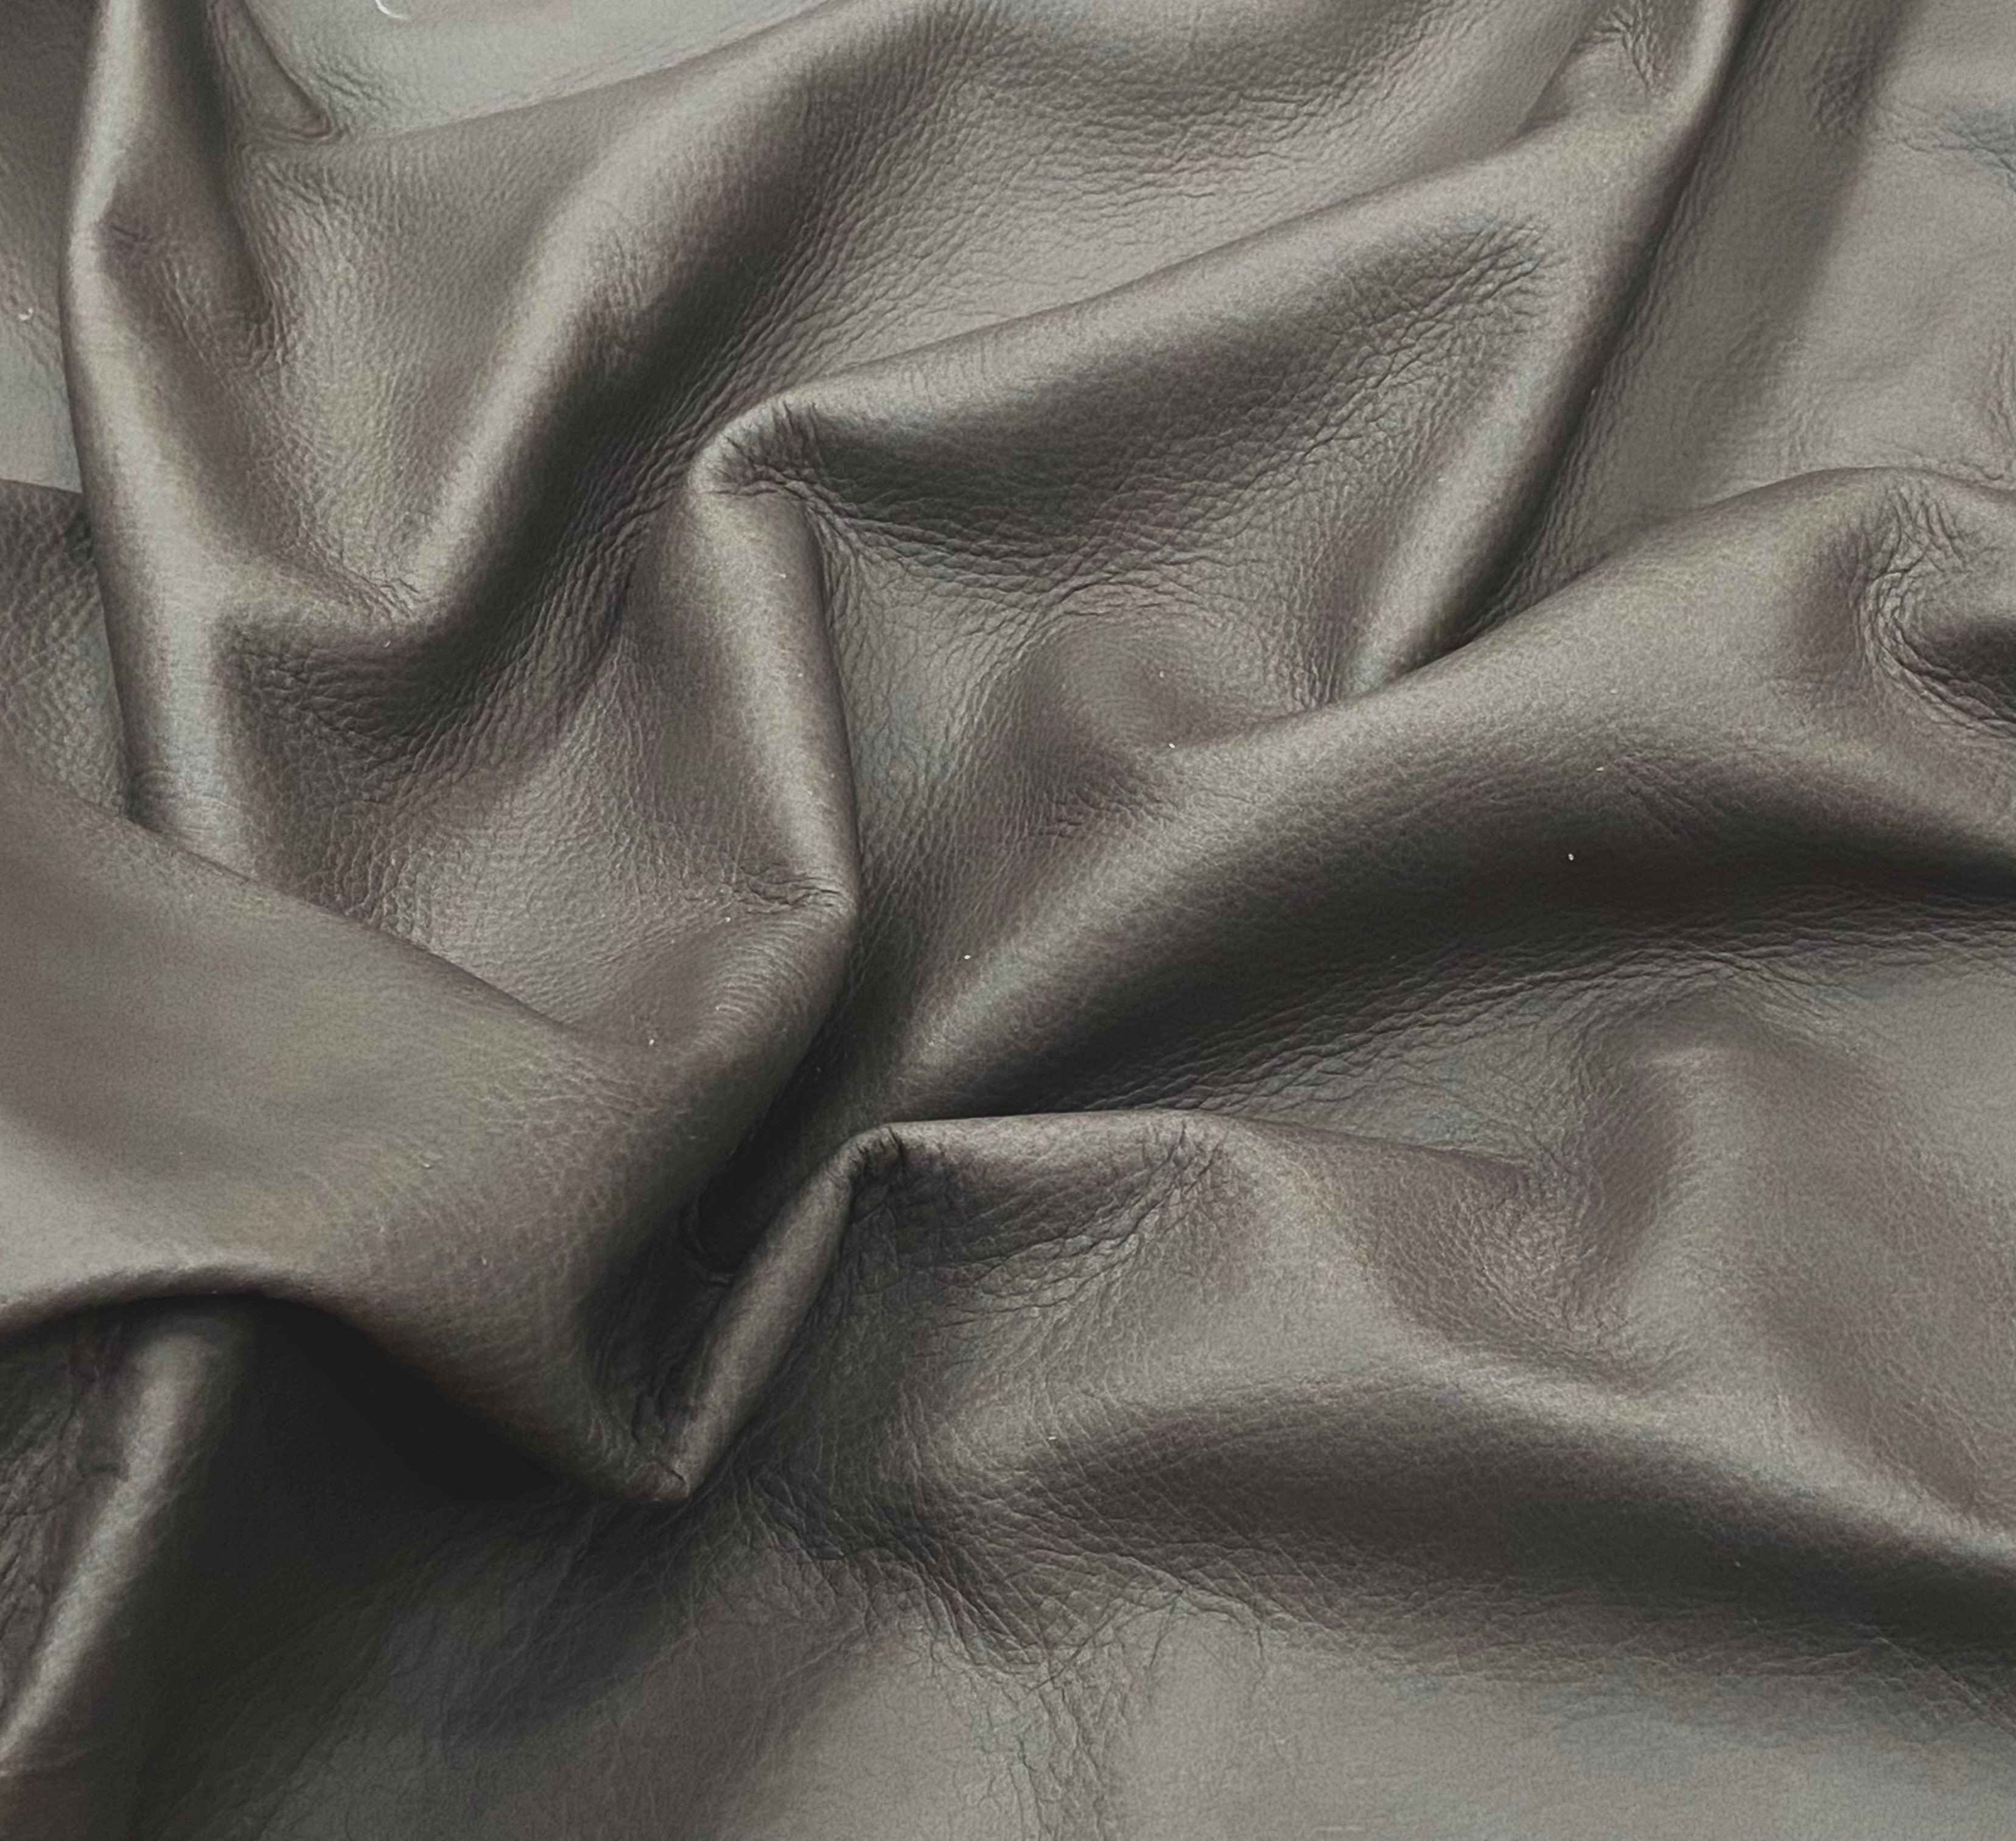 Ranch Steel, Upholstery Leather Cow Hide : (1.2 -1.4mm 3-4oz) 30